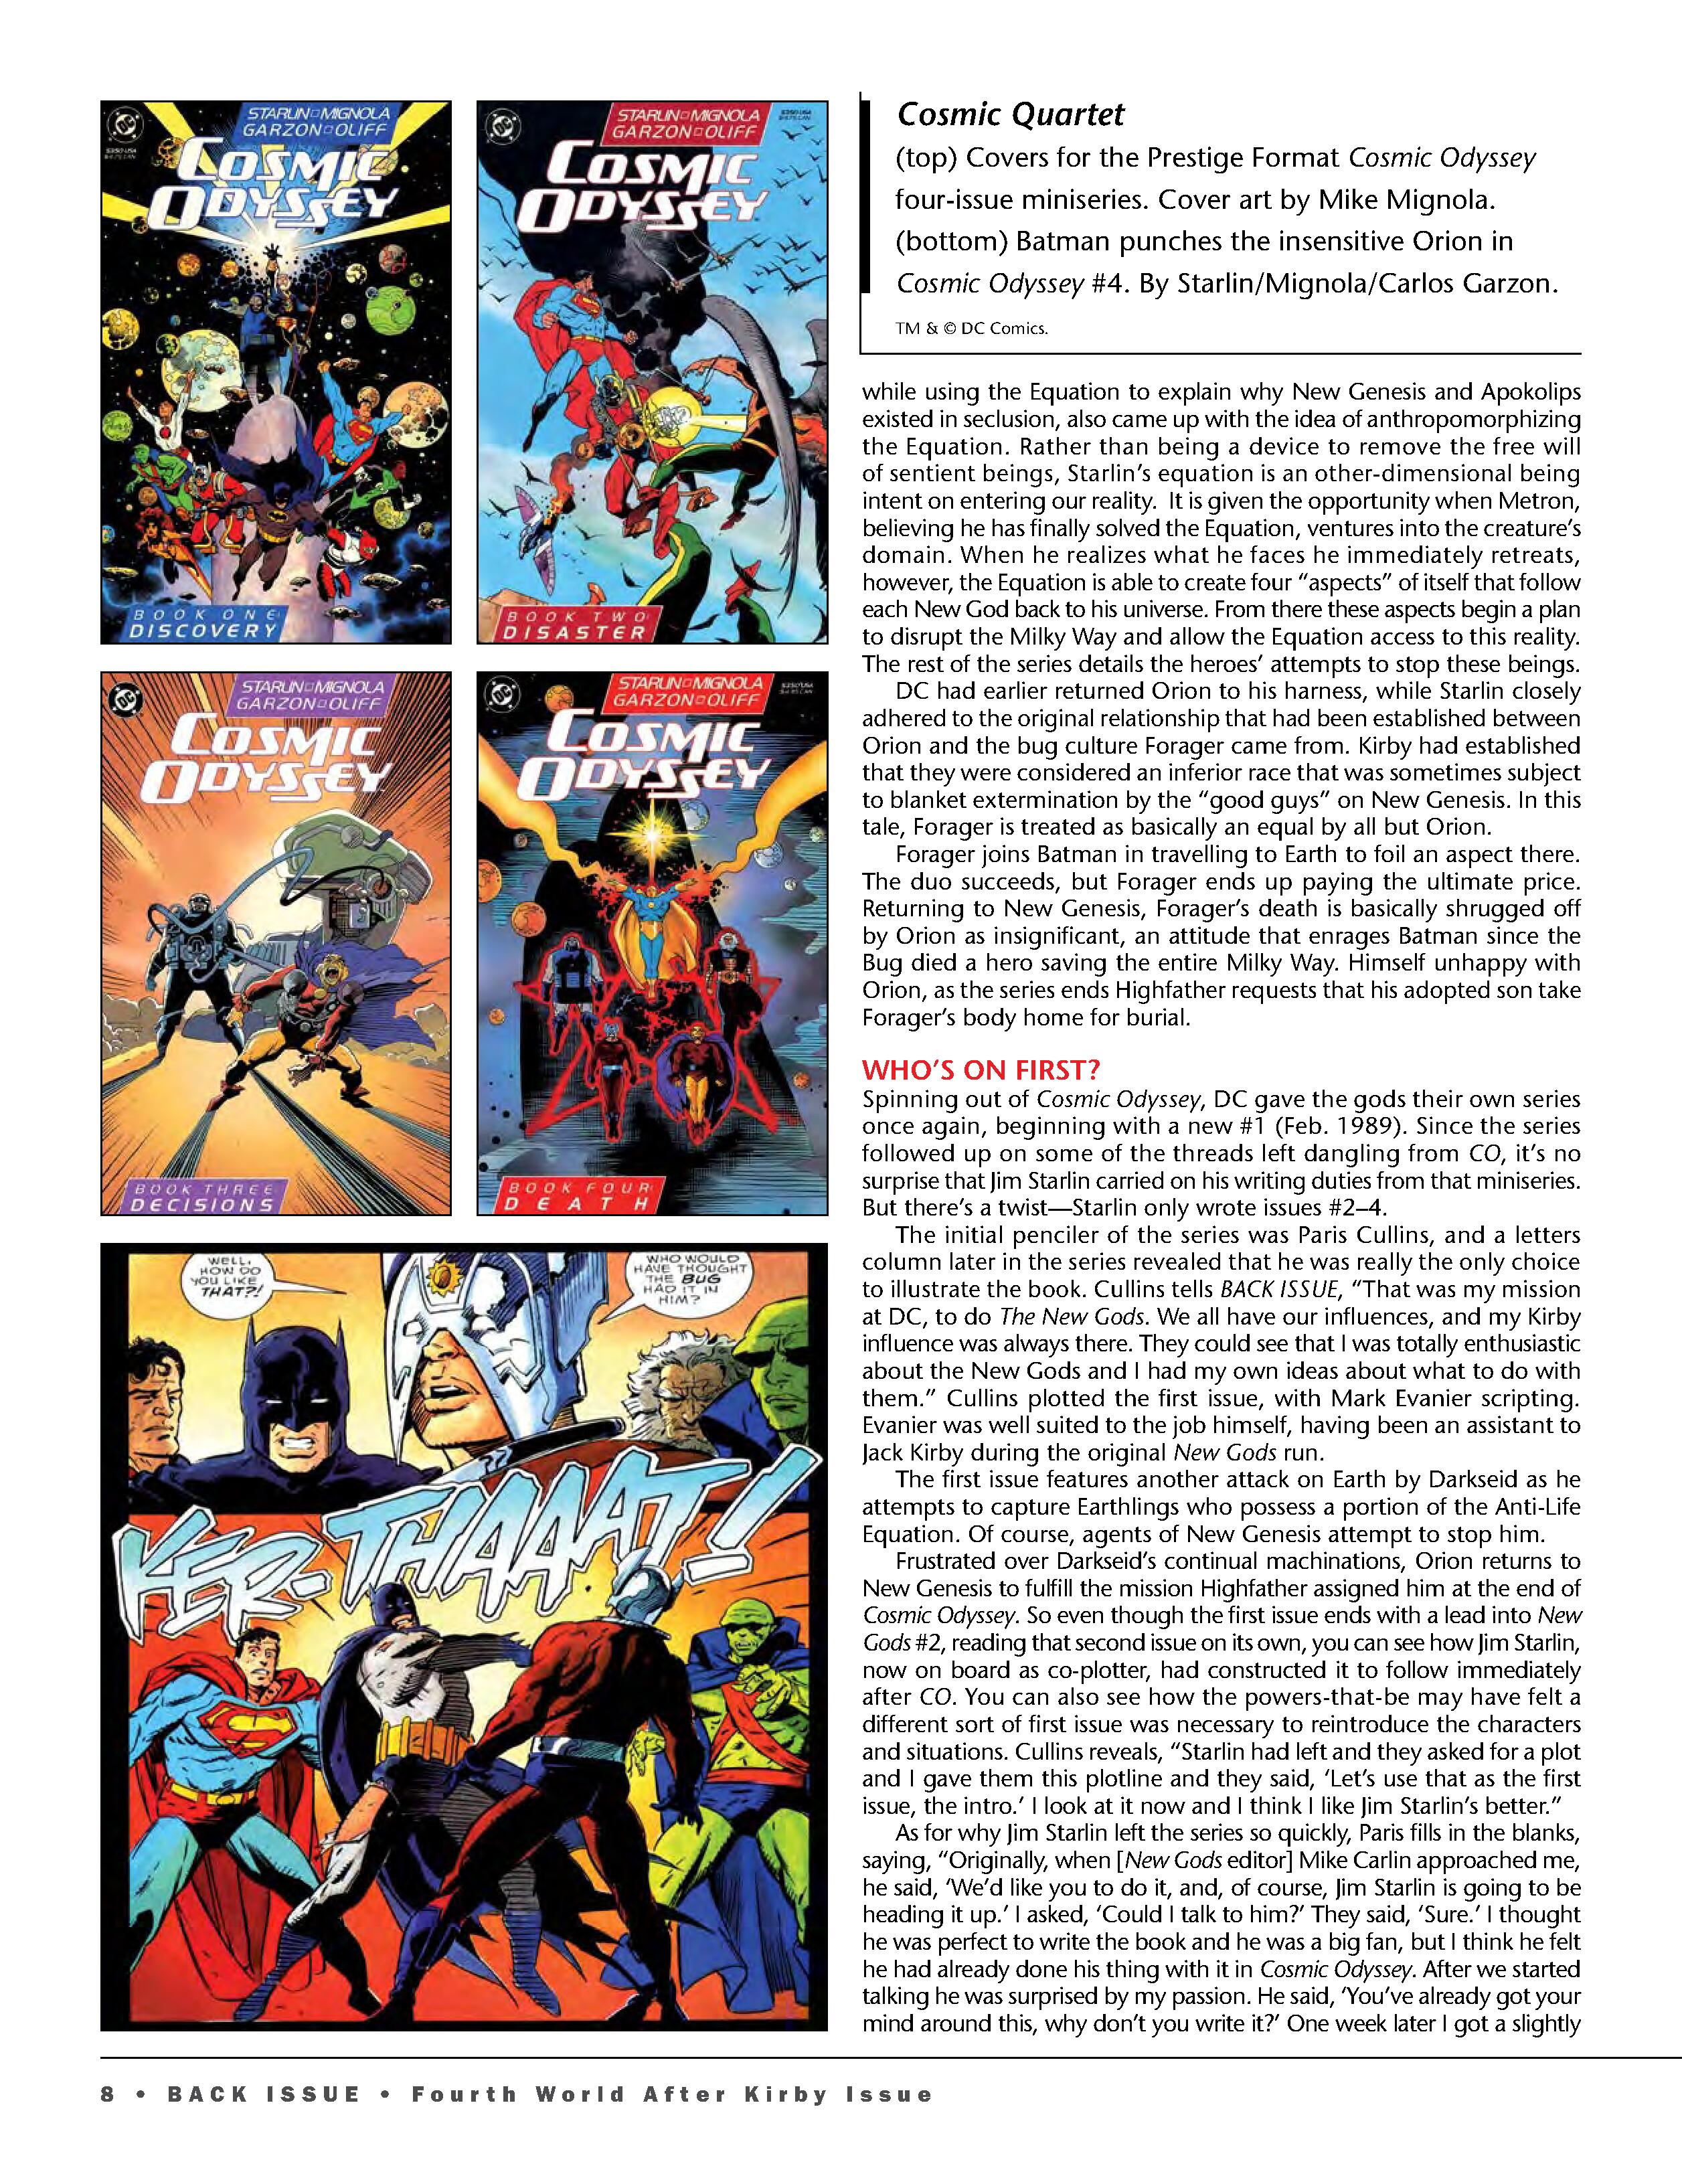 Read online Back Issue comic -  Issue #104 - 10